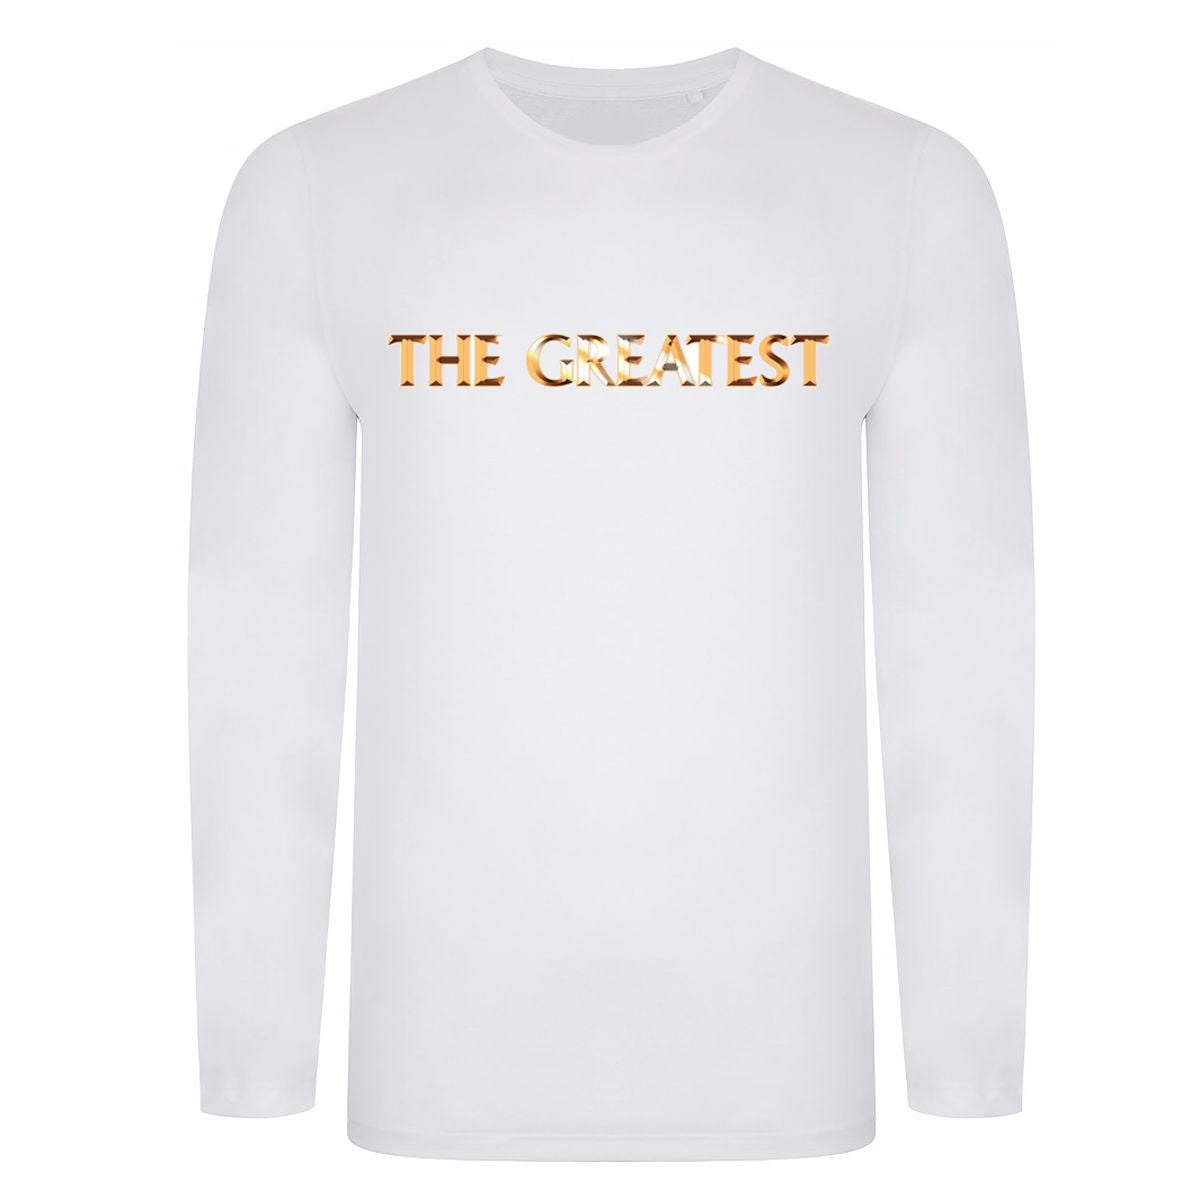 Queen - The Greatest Long Sleeve T-Shirt